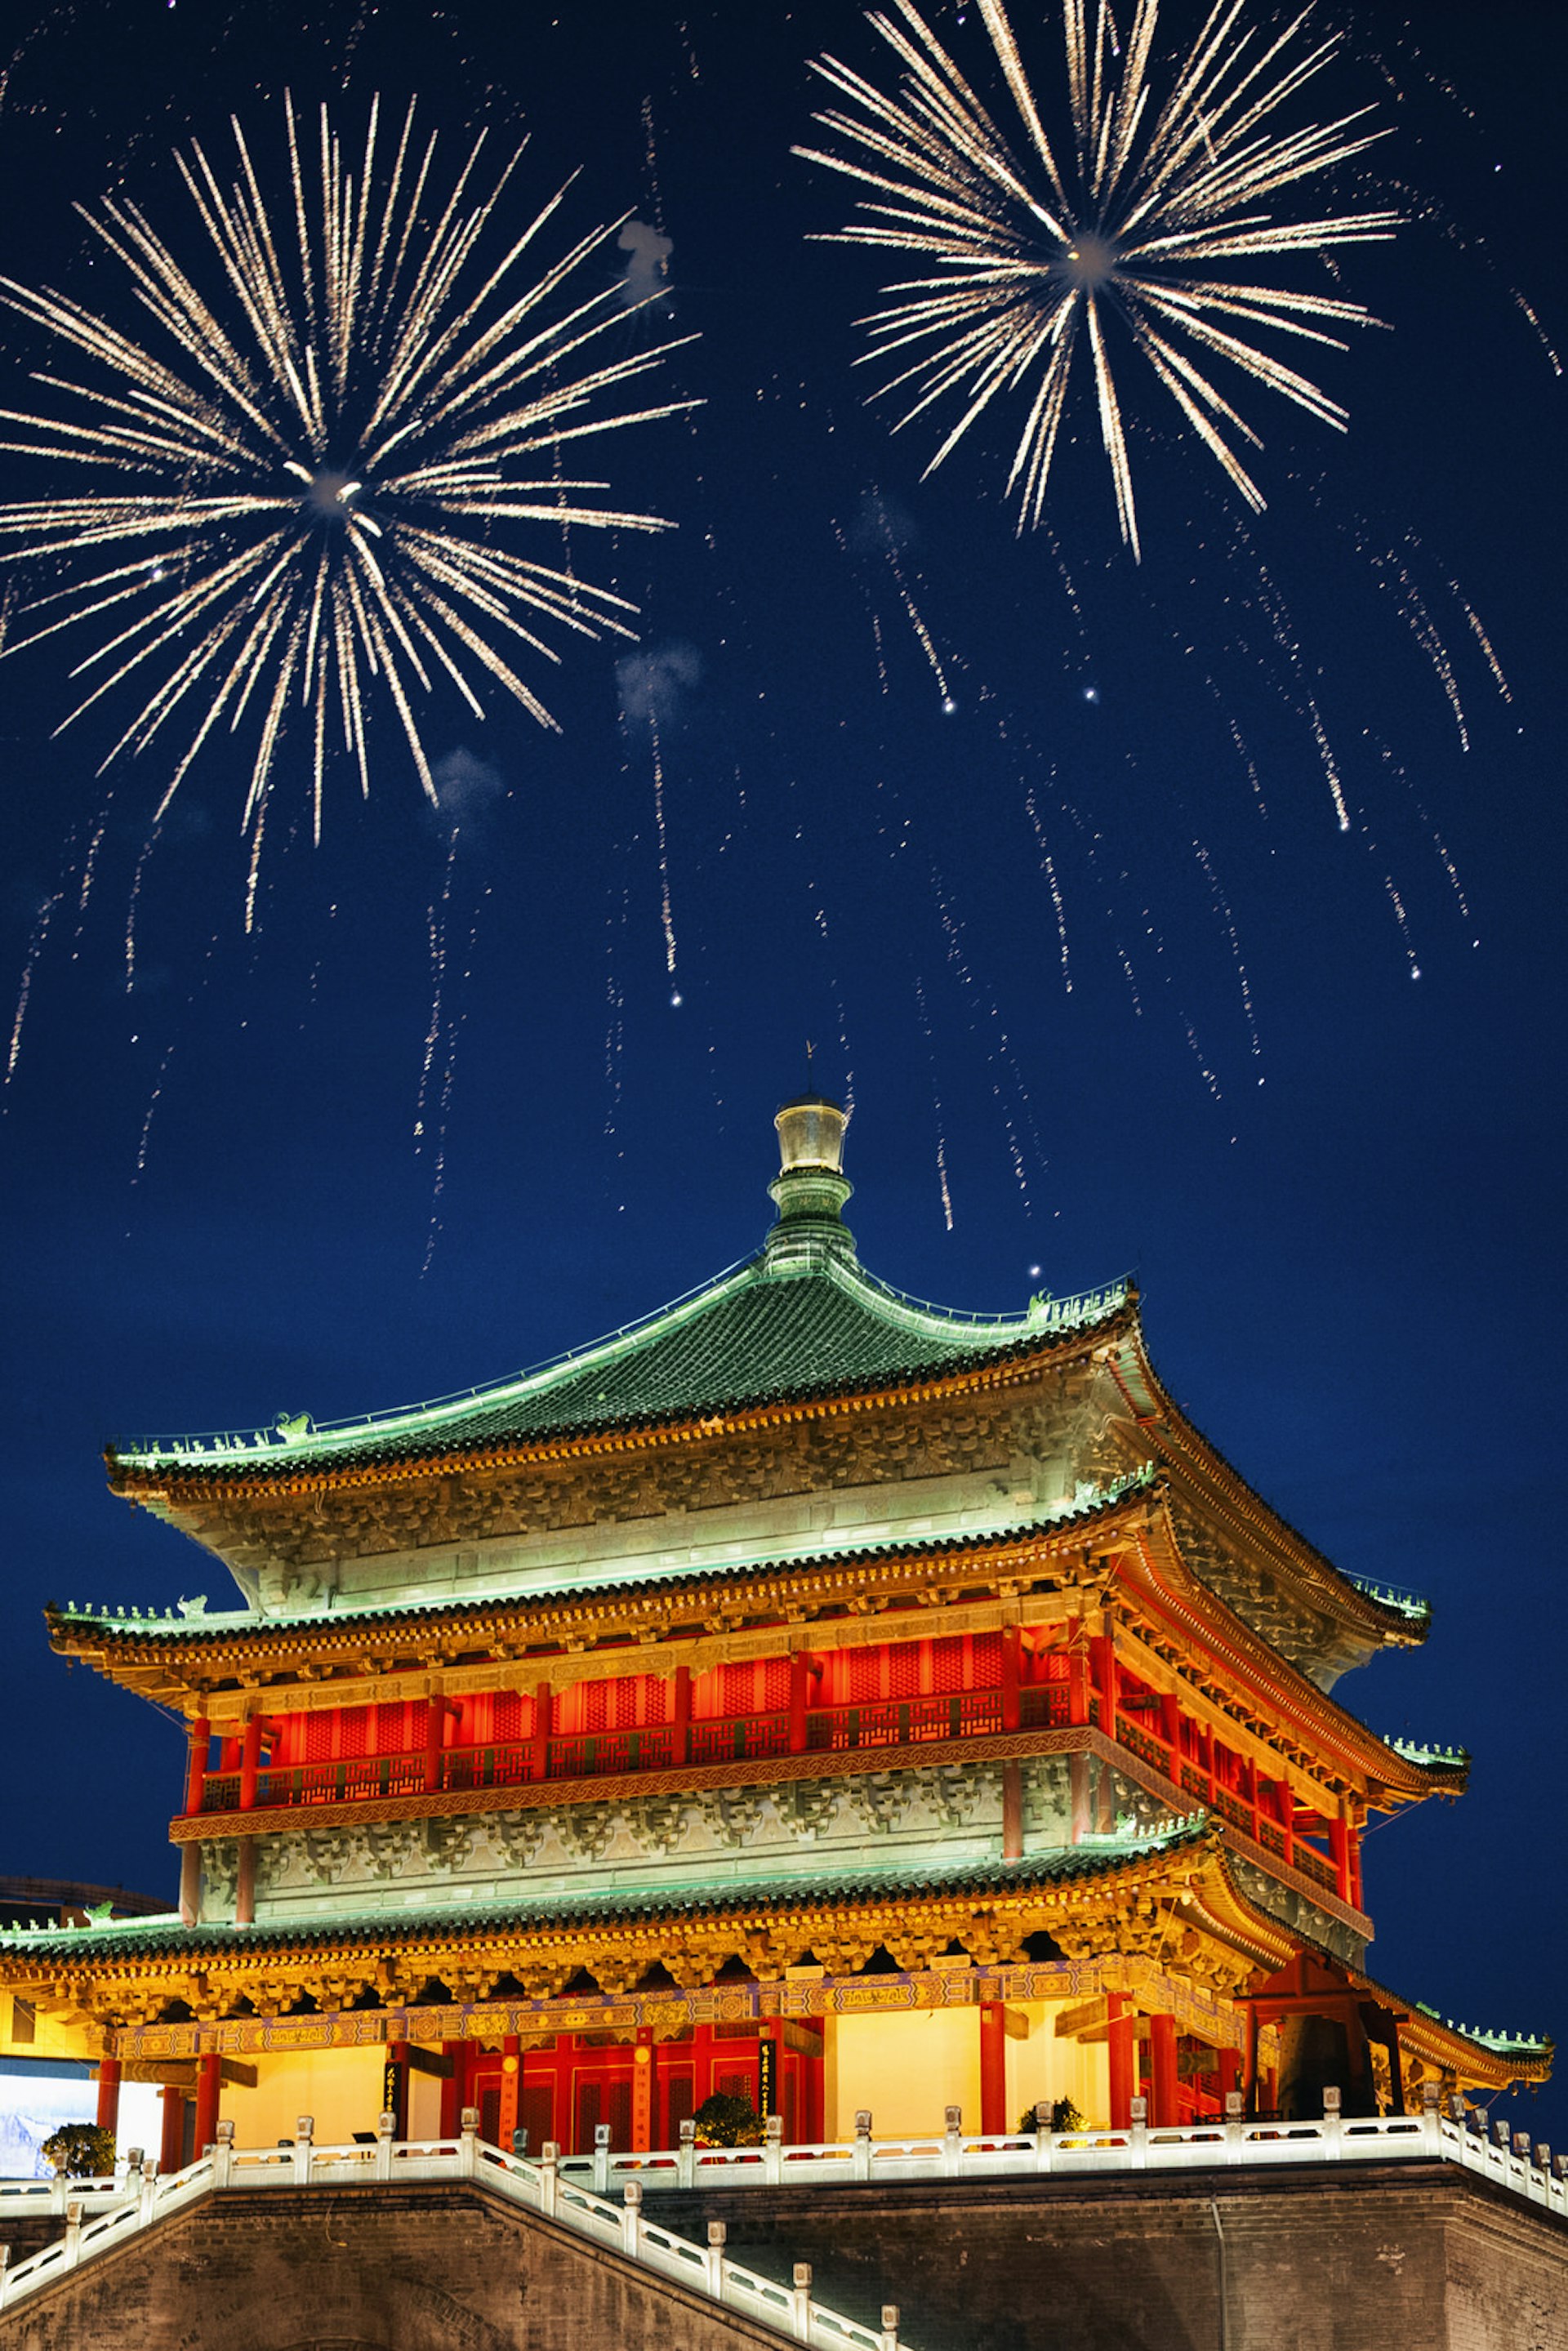 New Year's fireworks over the Bell Tower in Xi'an © powerofforever / Getty